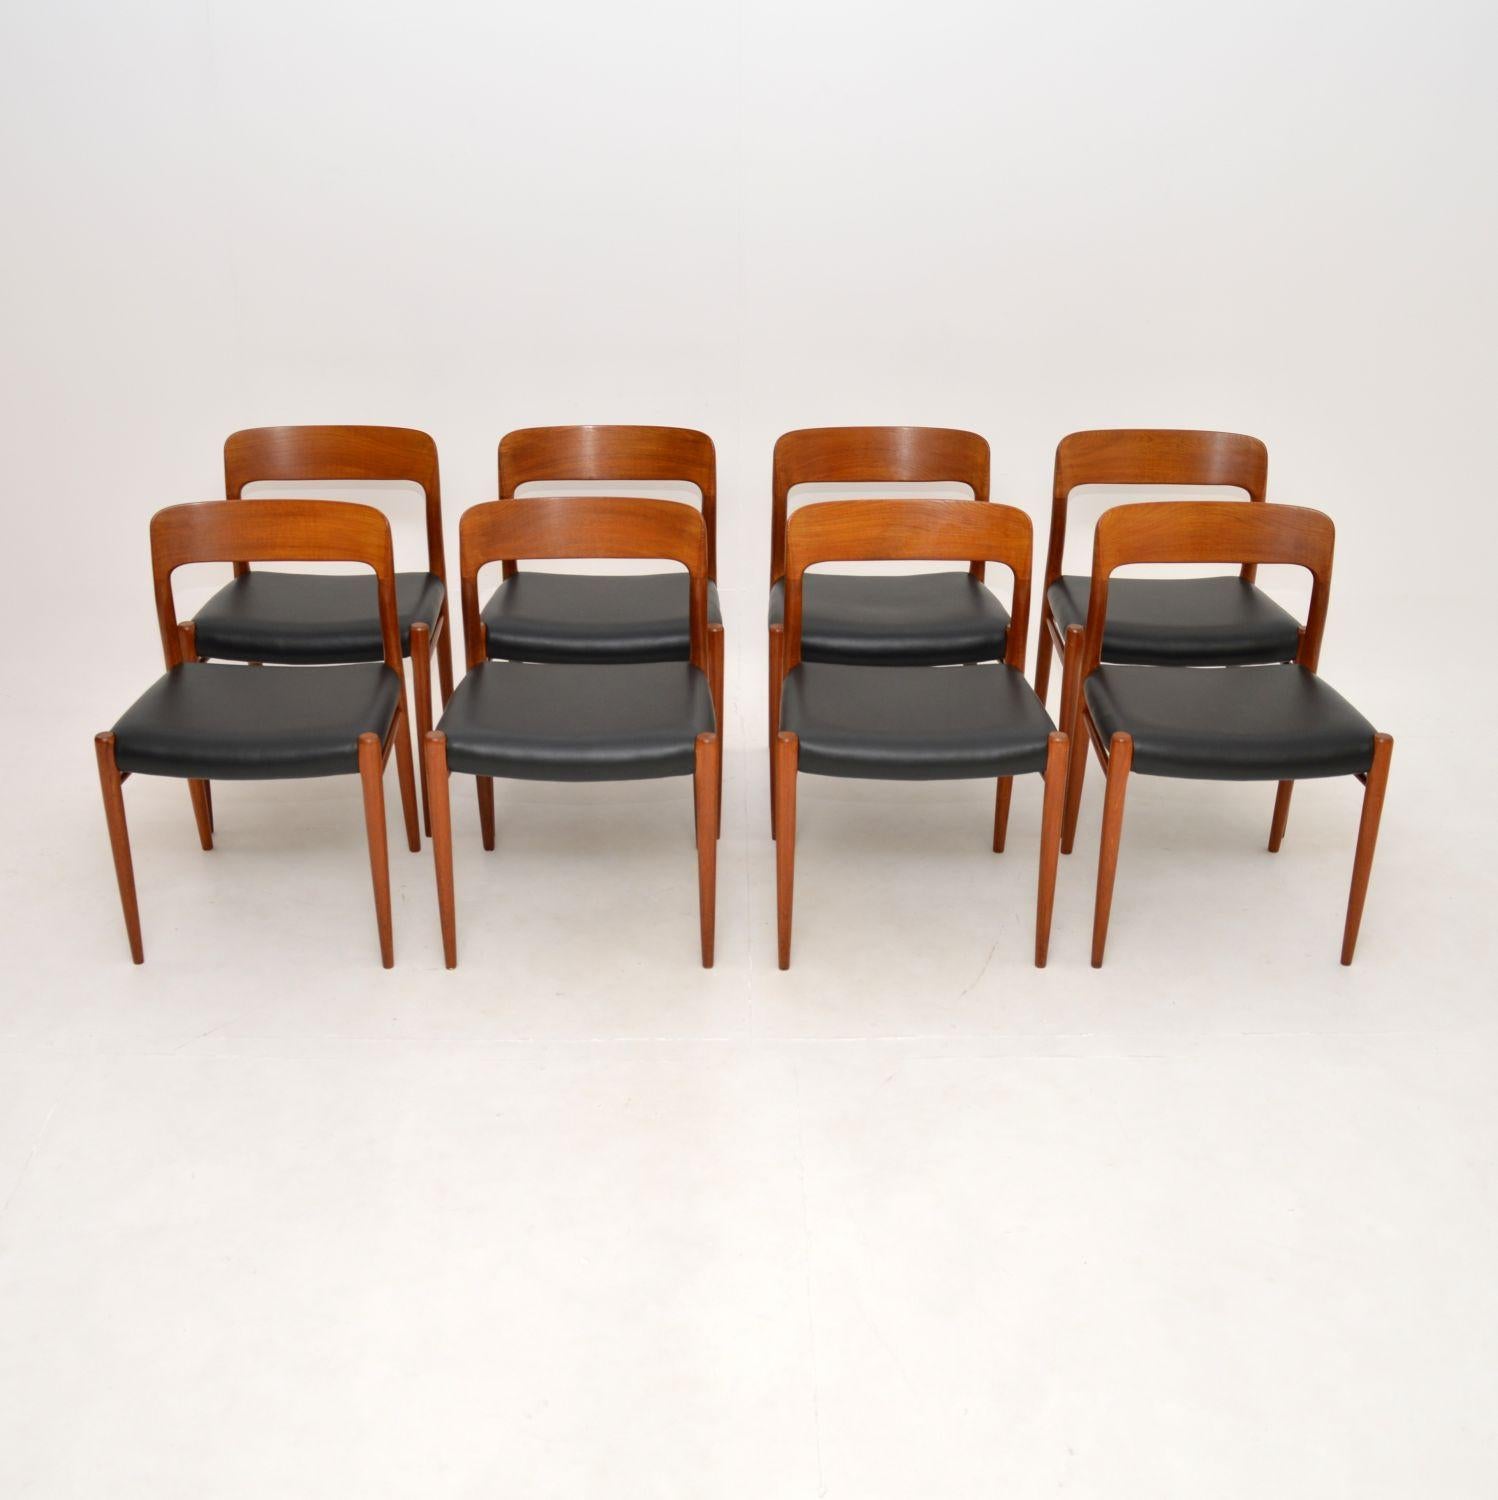 A stunning vintage set of 8 teak and leather model 75 dining chairs by Niels Moller. They were made in Denmark, they date from the 1960’s.

The quality is outstanding, they are beautifully designed and are also very comfortable. The teak frames have